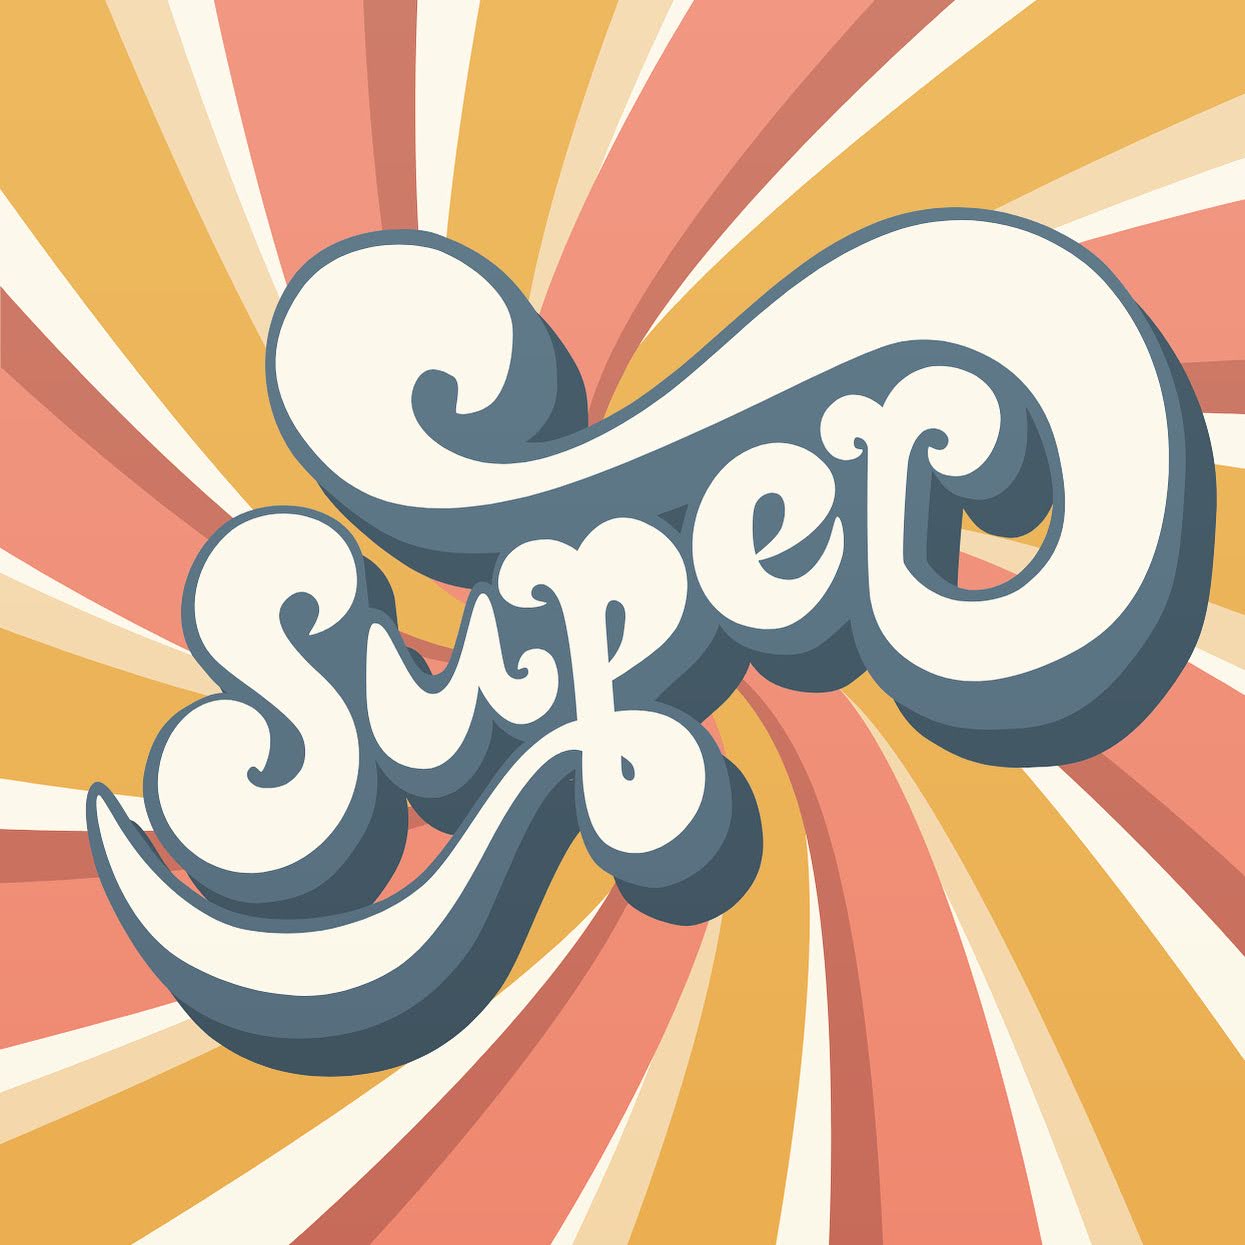 Super in retro graphic font with bright colored swirl behind it